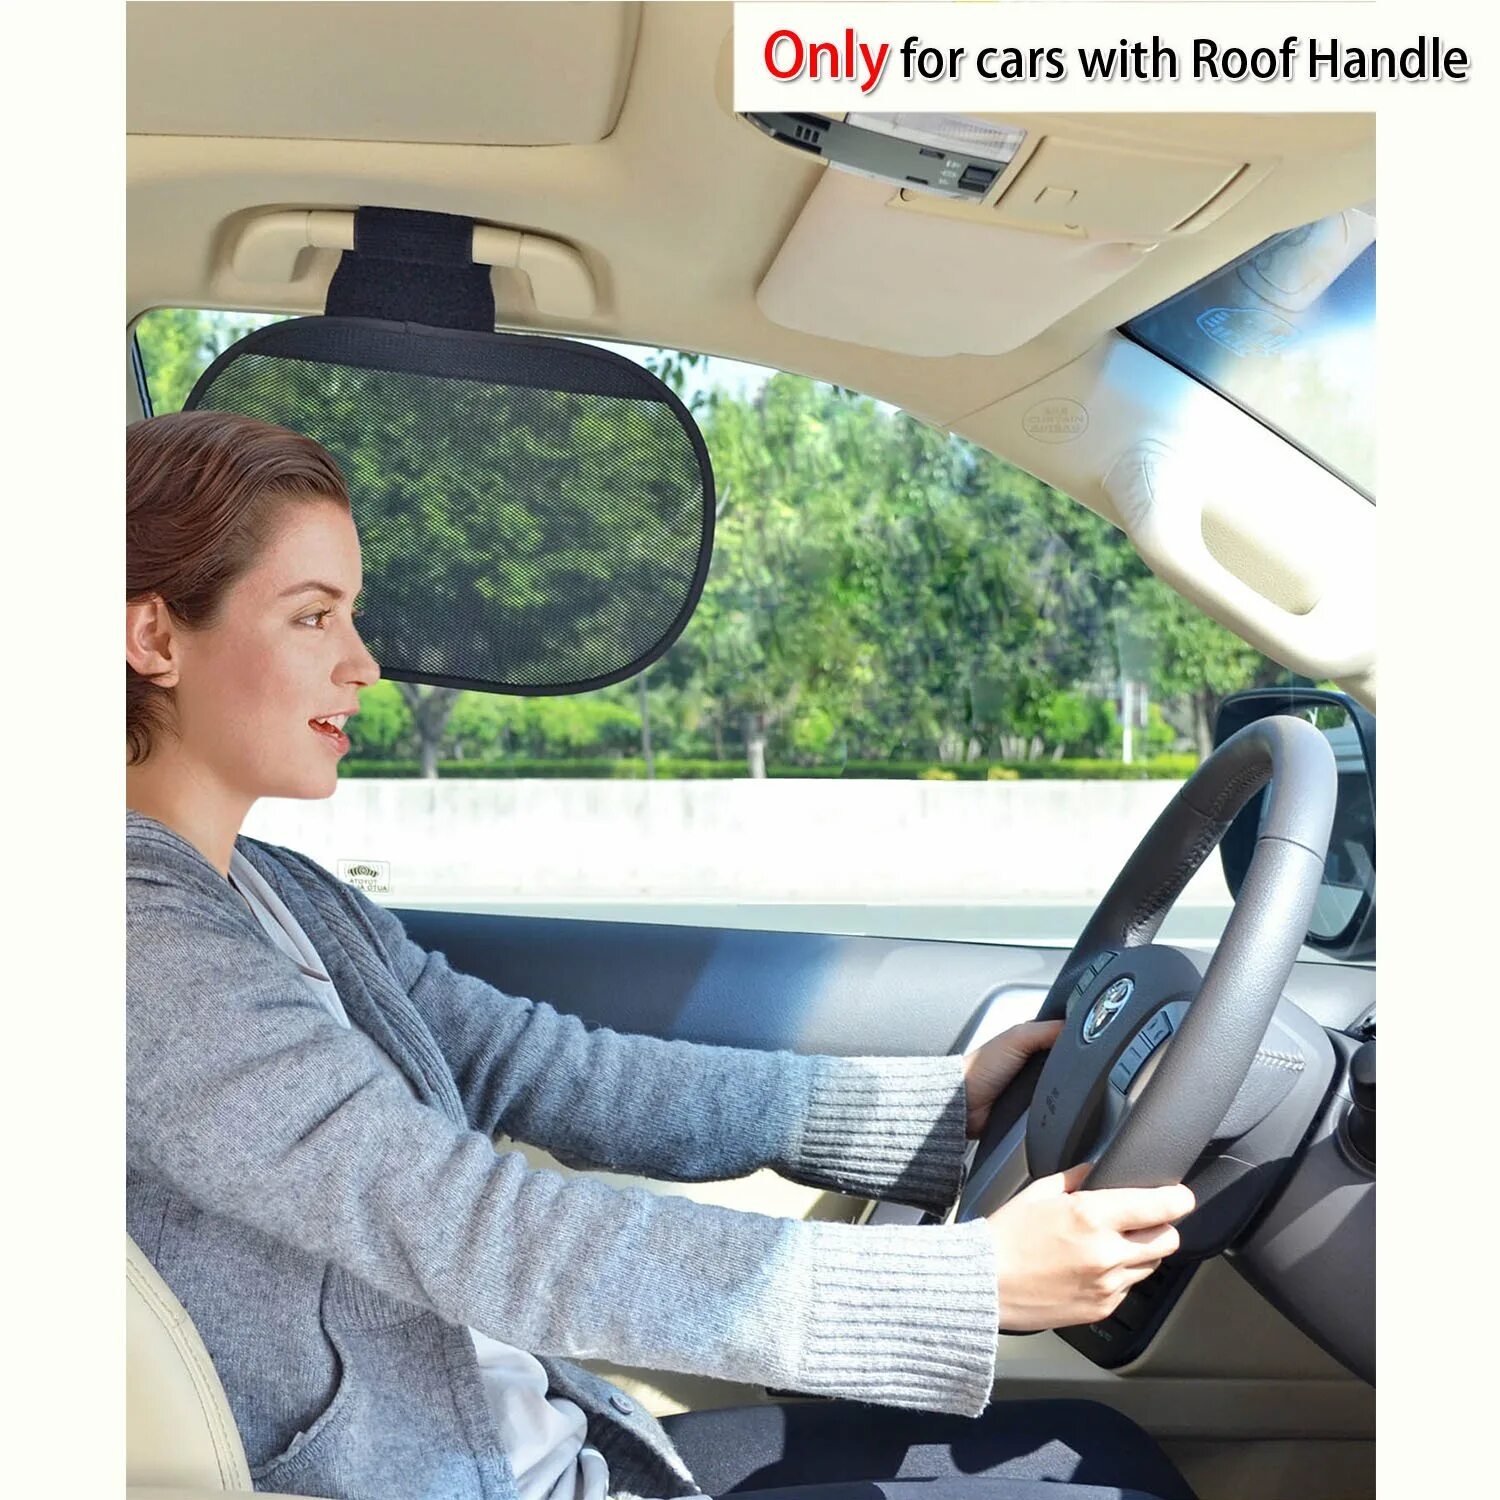 Sun Visors, Driver and Passenger Side. Car Interior Passenger compartment Weel view Windshield.